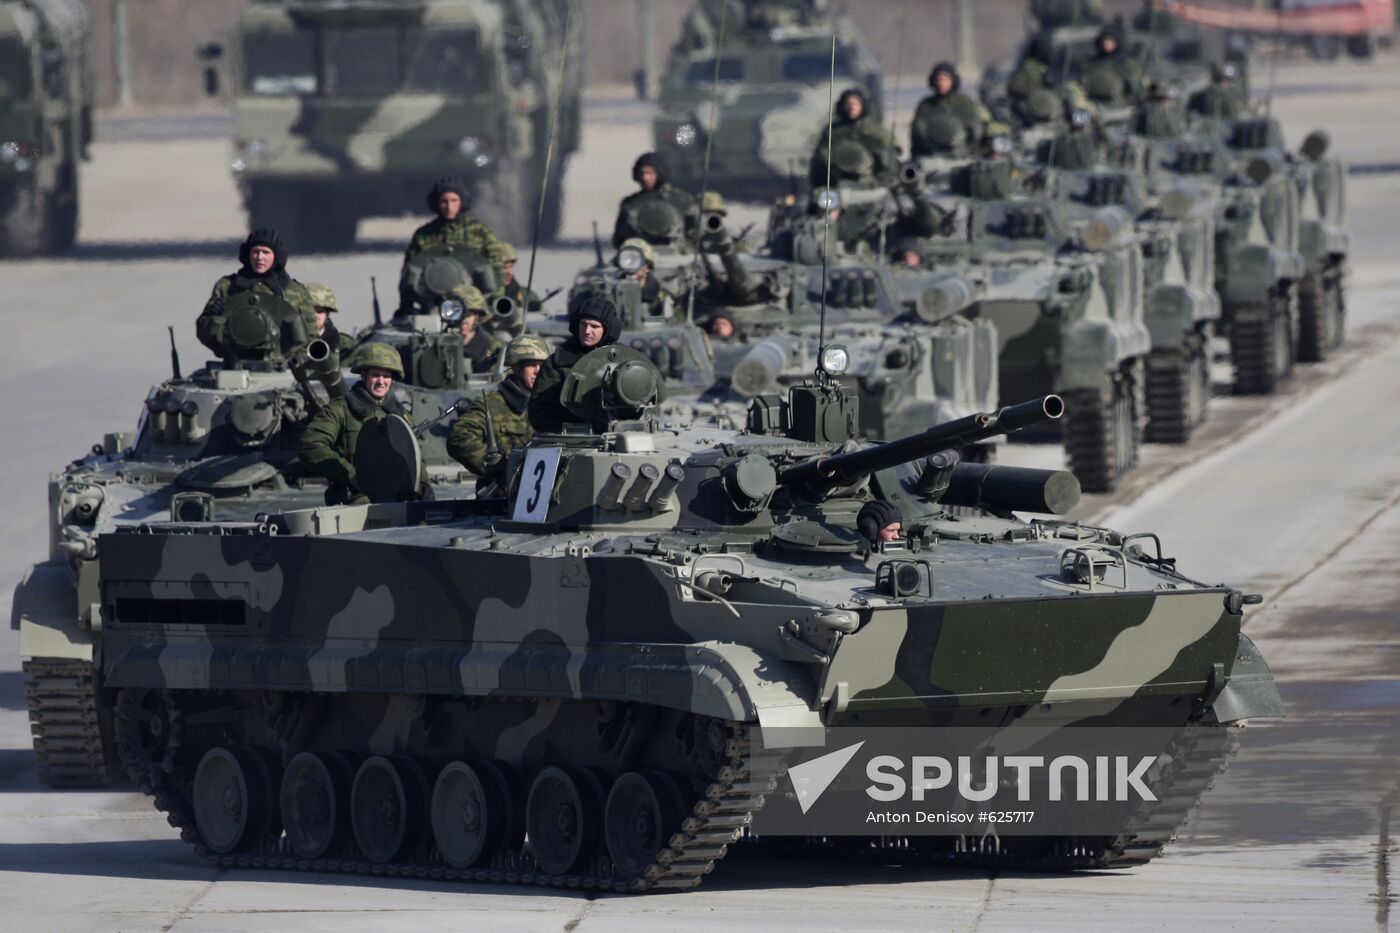 BMP-3 armored personnel carriers